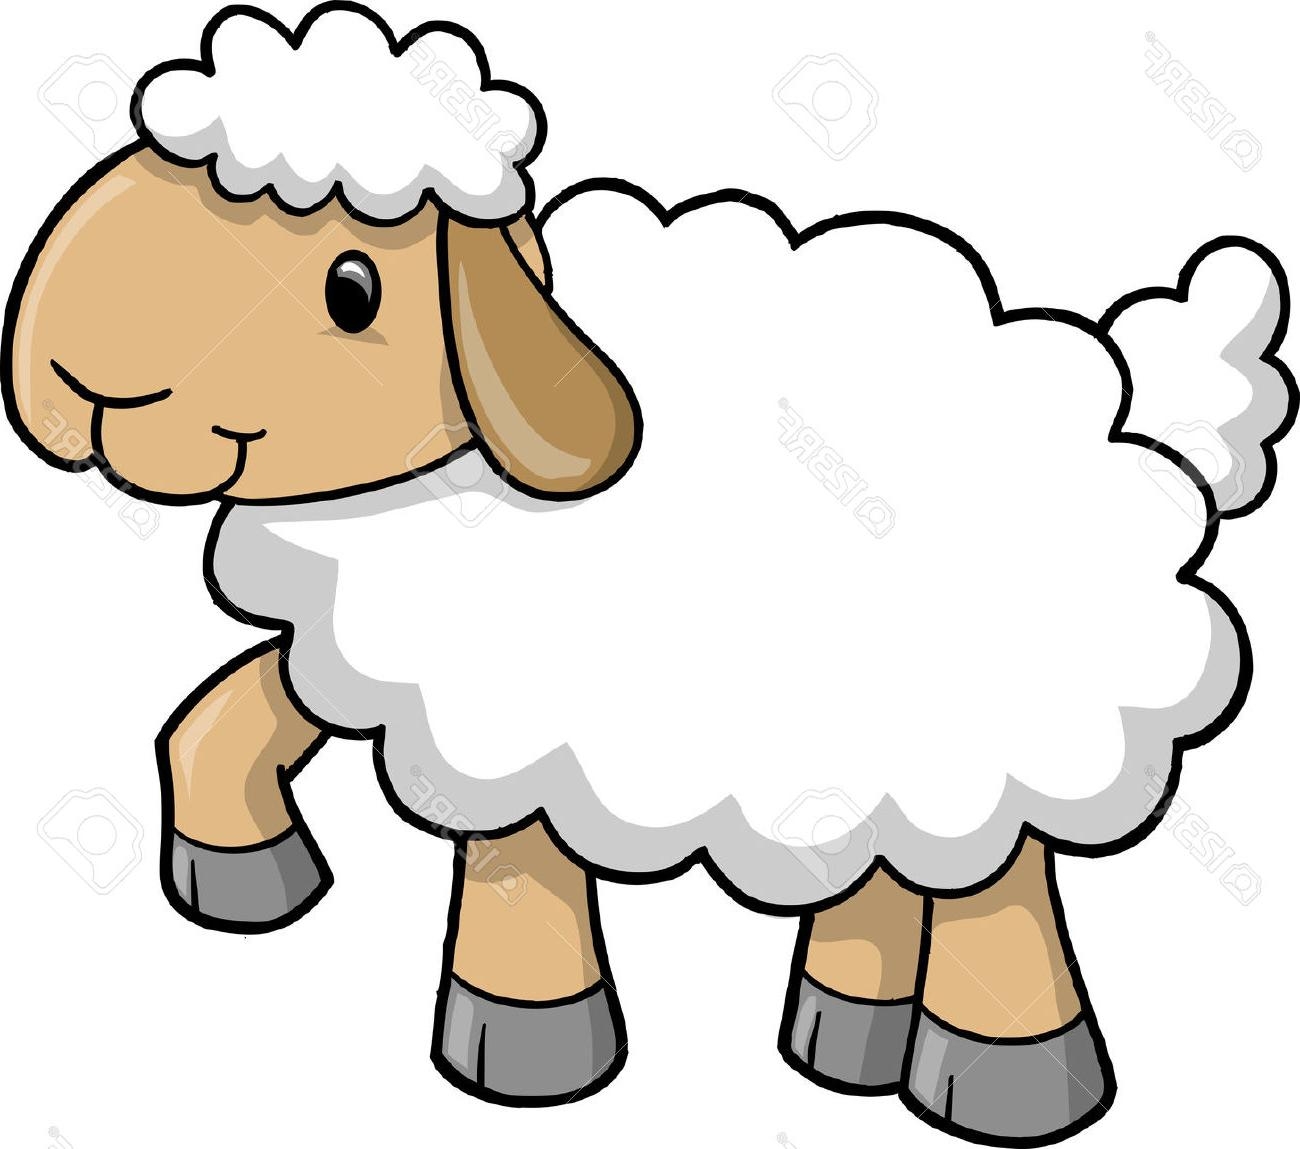 Sheep clipart, Sheep Transparent FREE for download on.